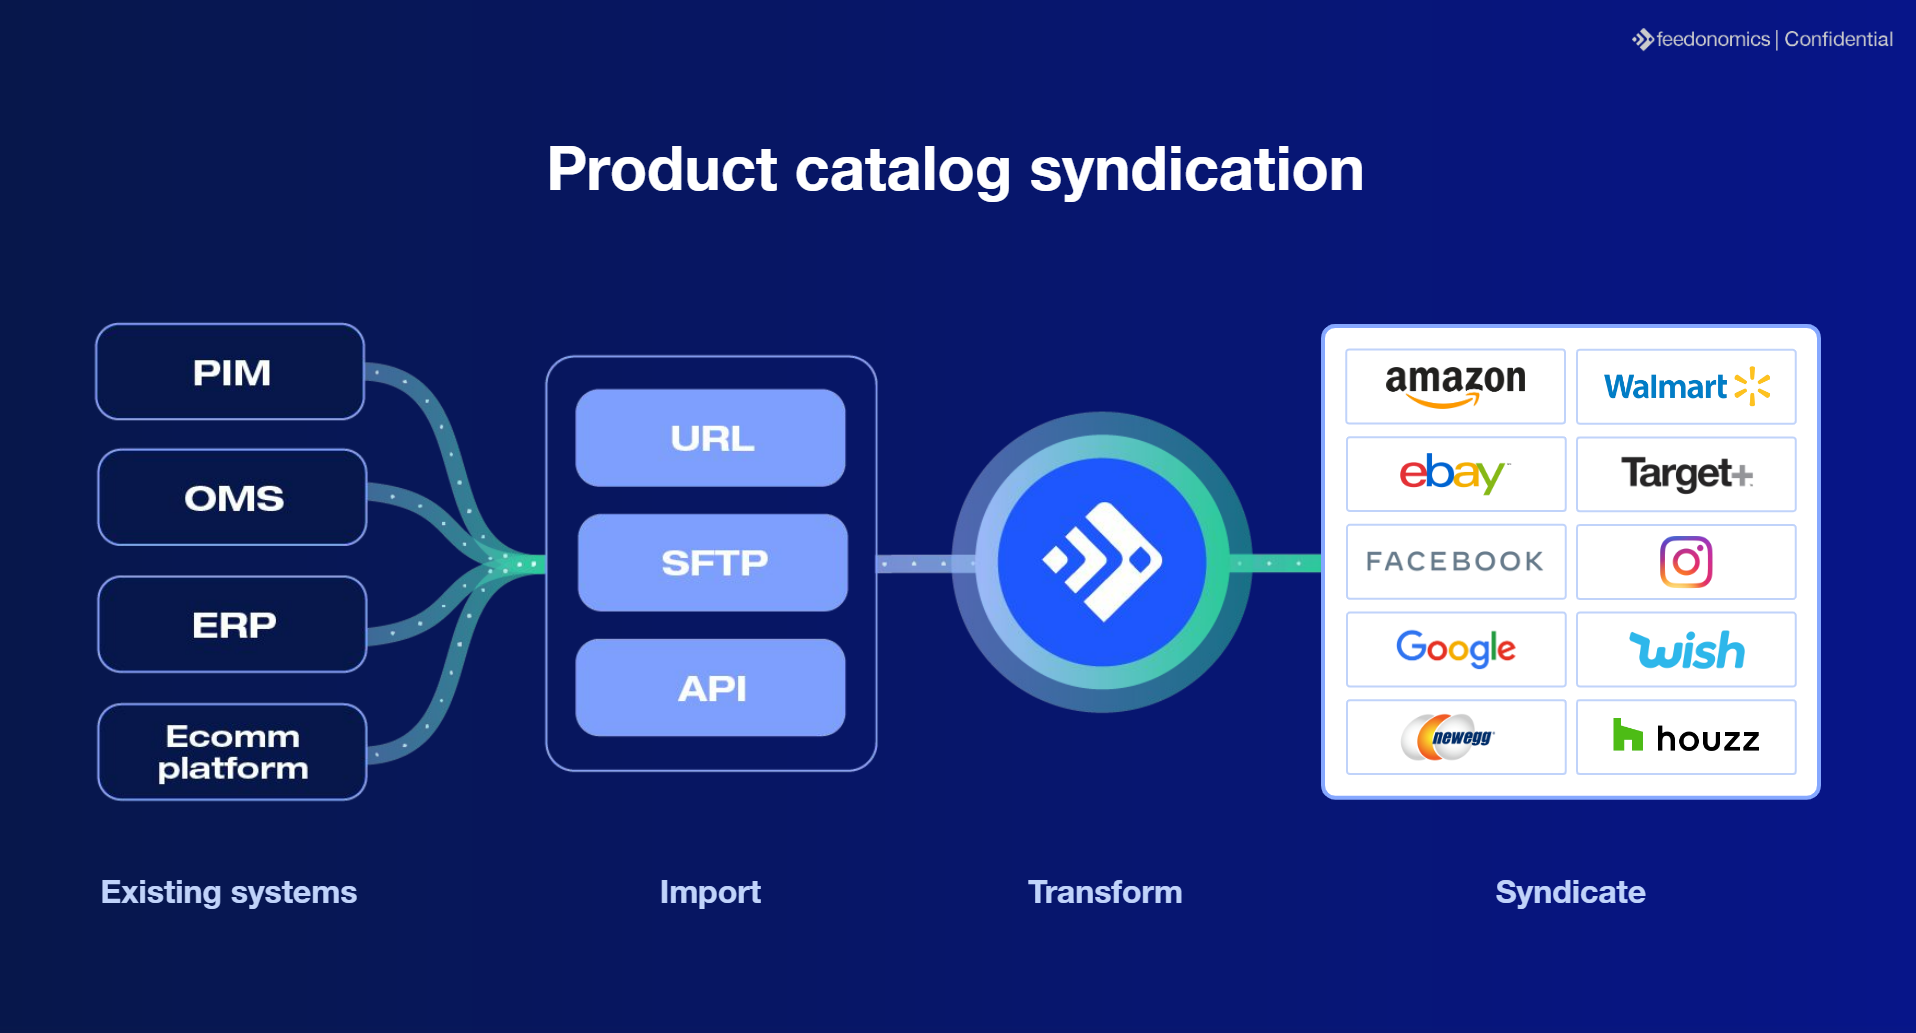 Product catalog syndication- Feedonomics makes it easy to synchronize your product feeds to multiple marketplaces and channels.